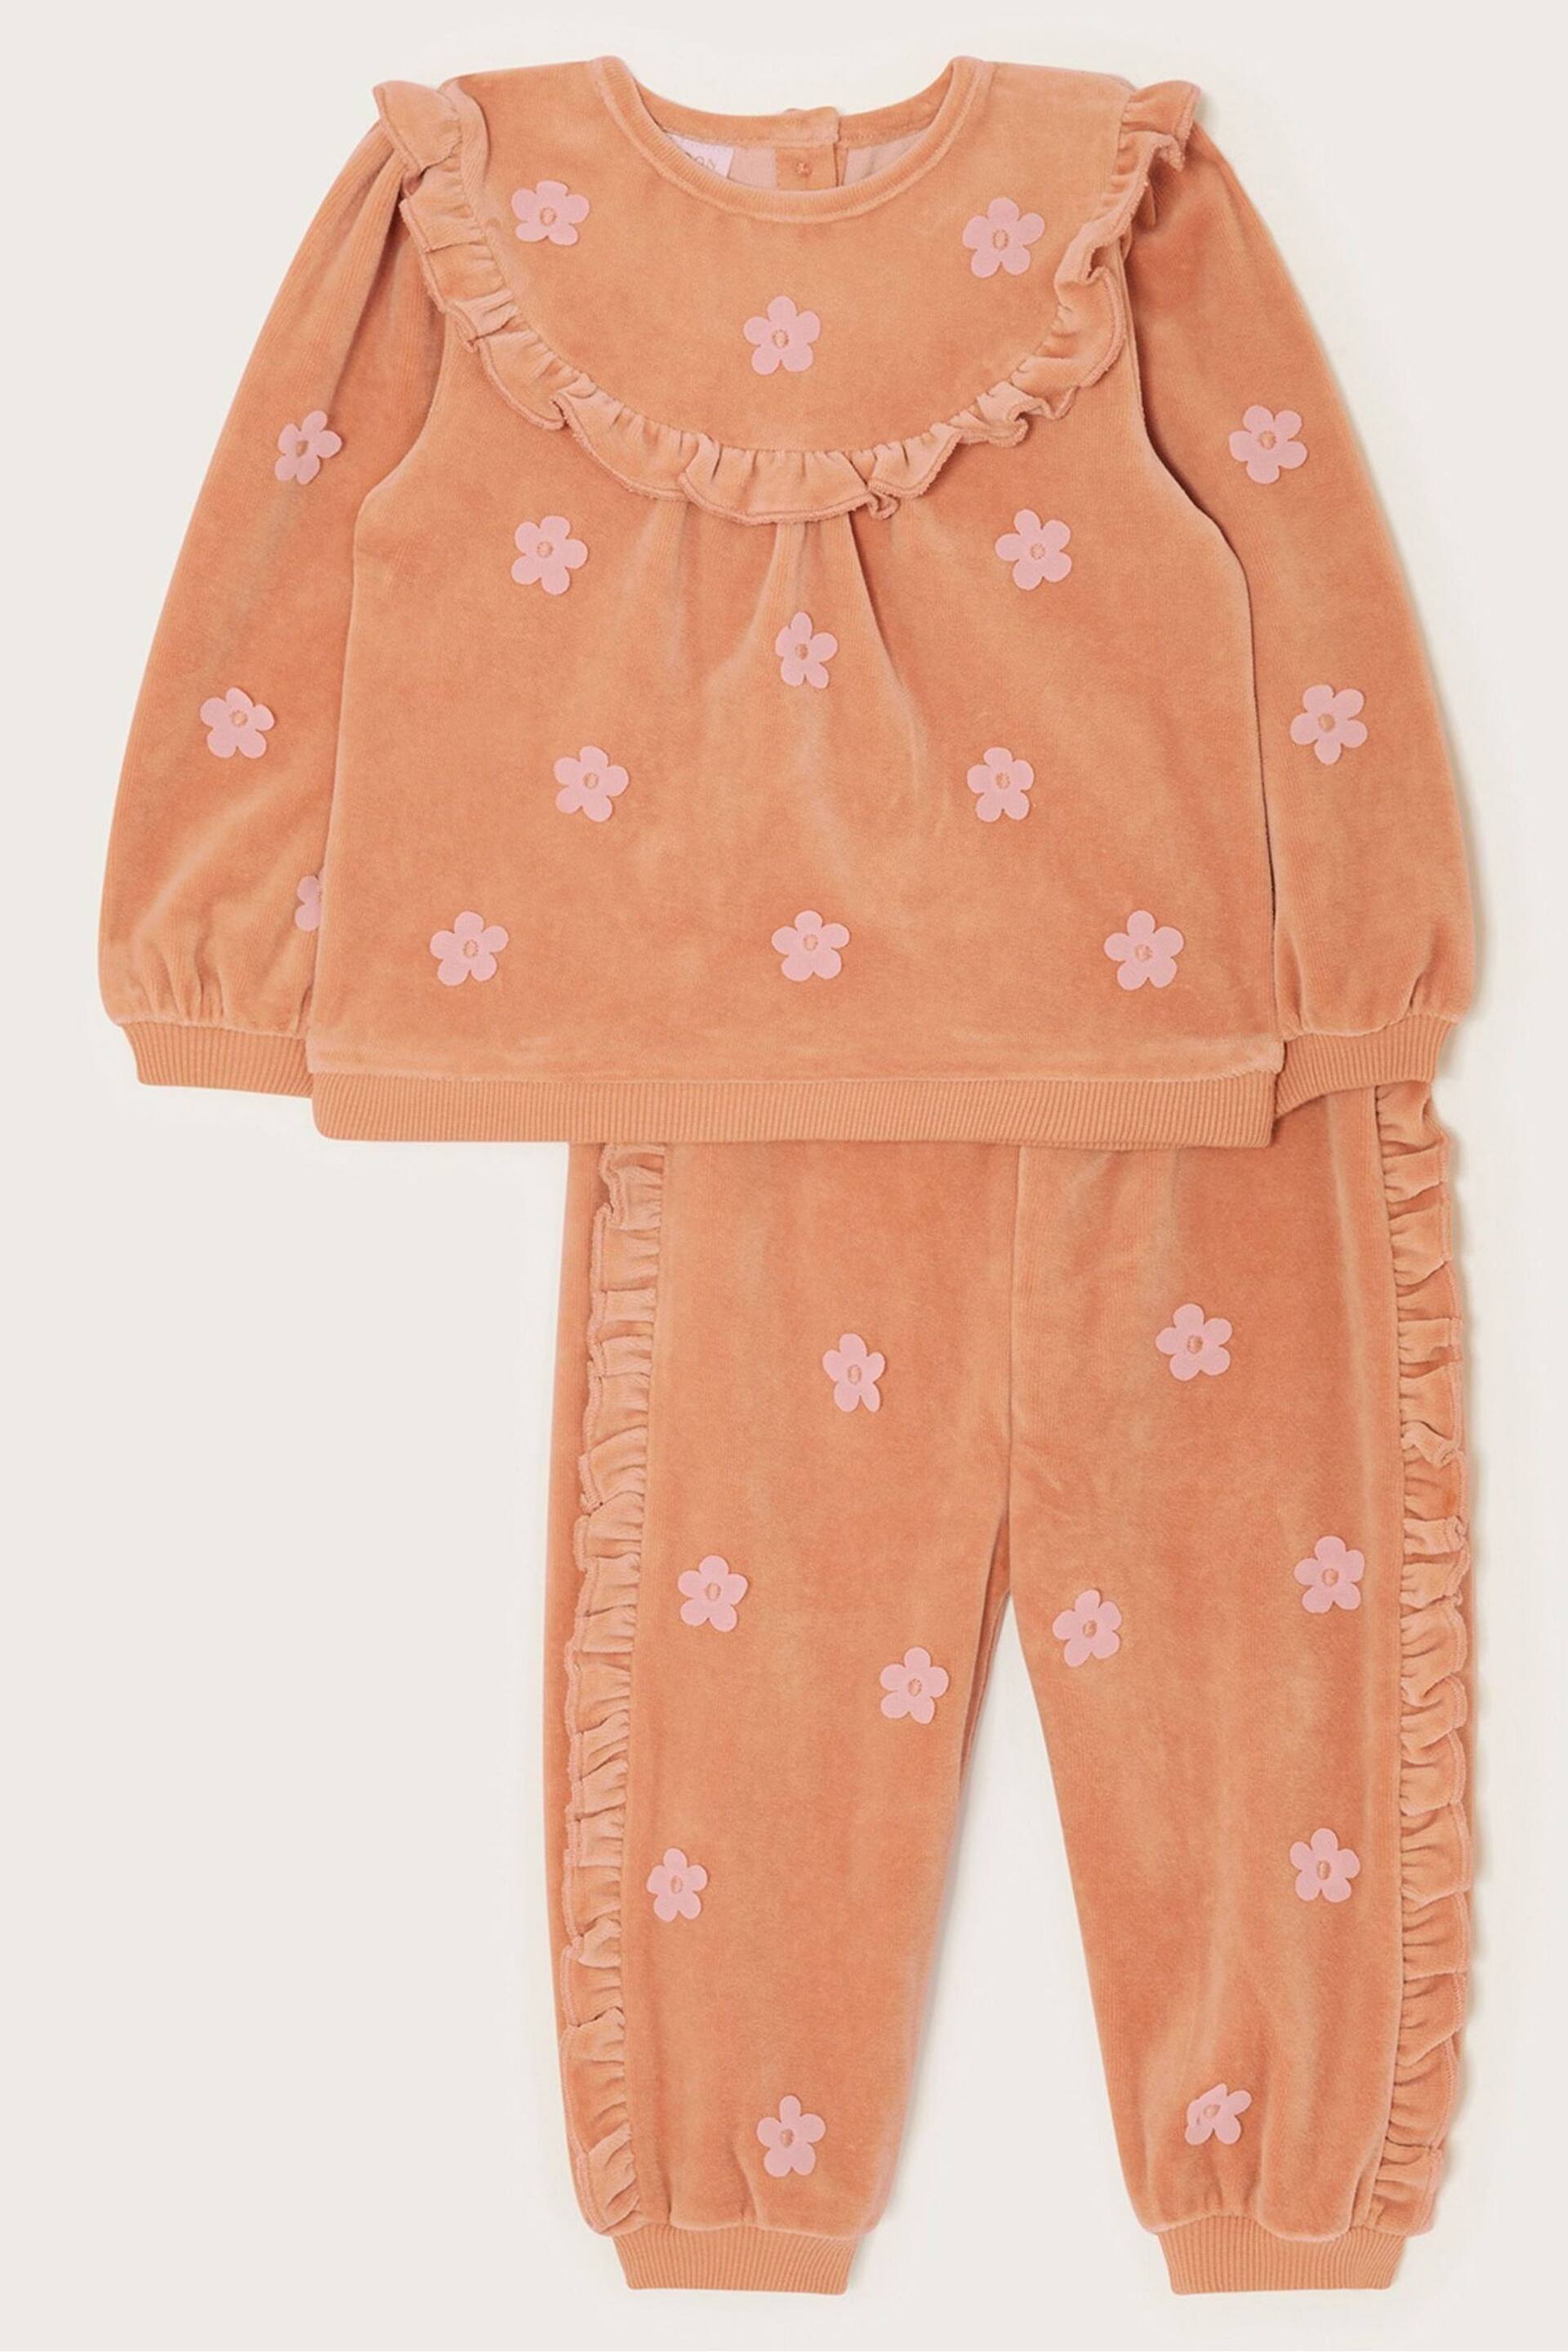 Monsoon Pink Baby Floral Velour Jumper and Joggers Set - Image 1 of 3